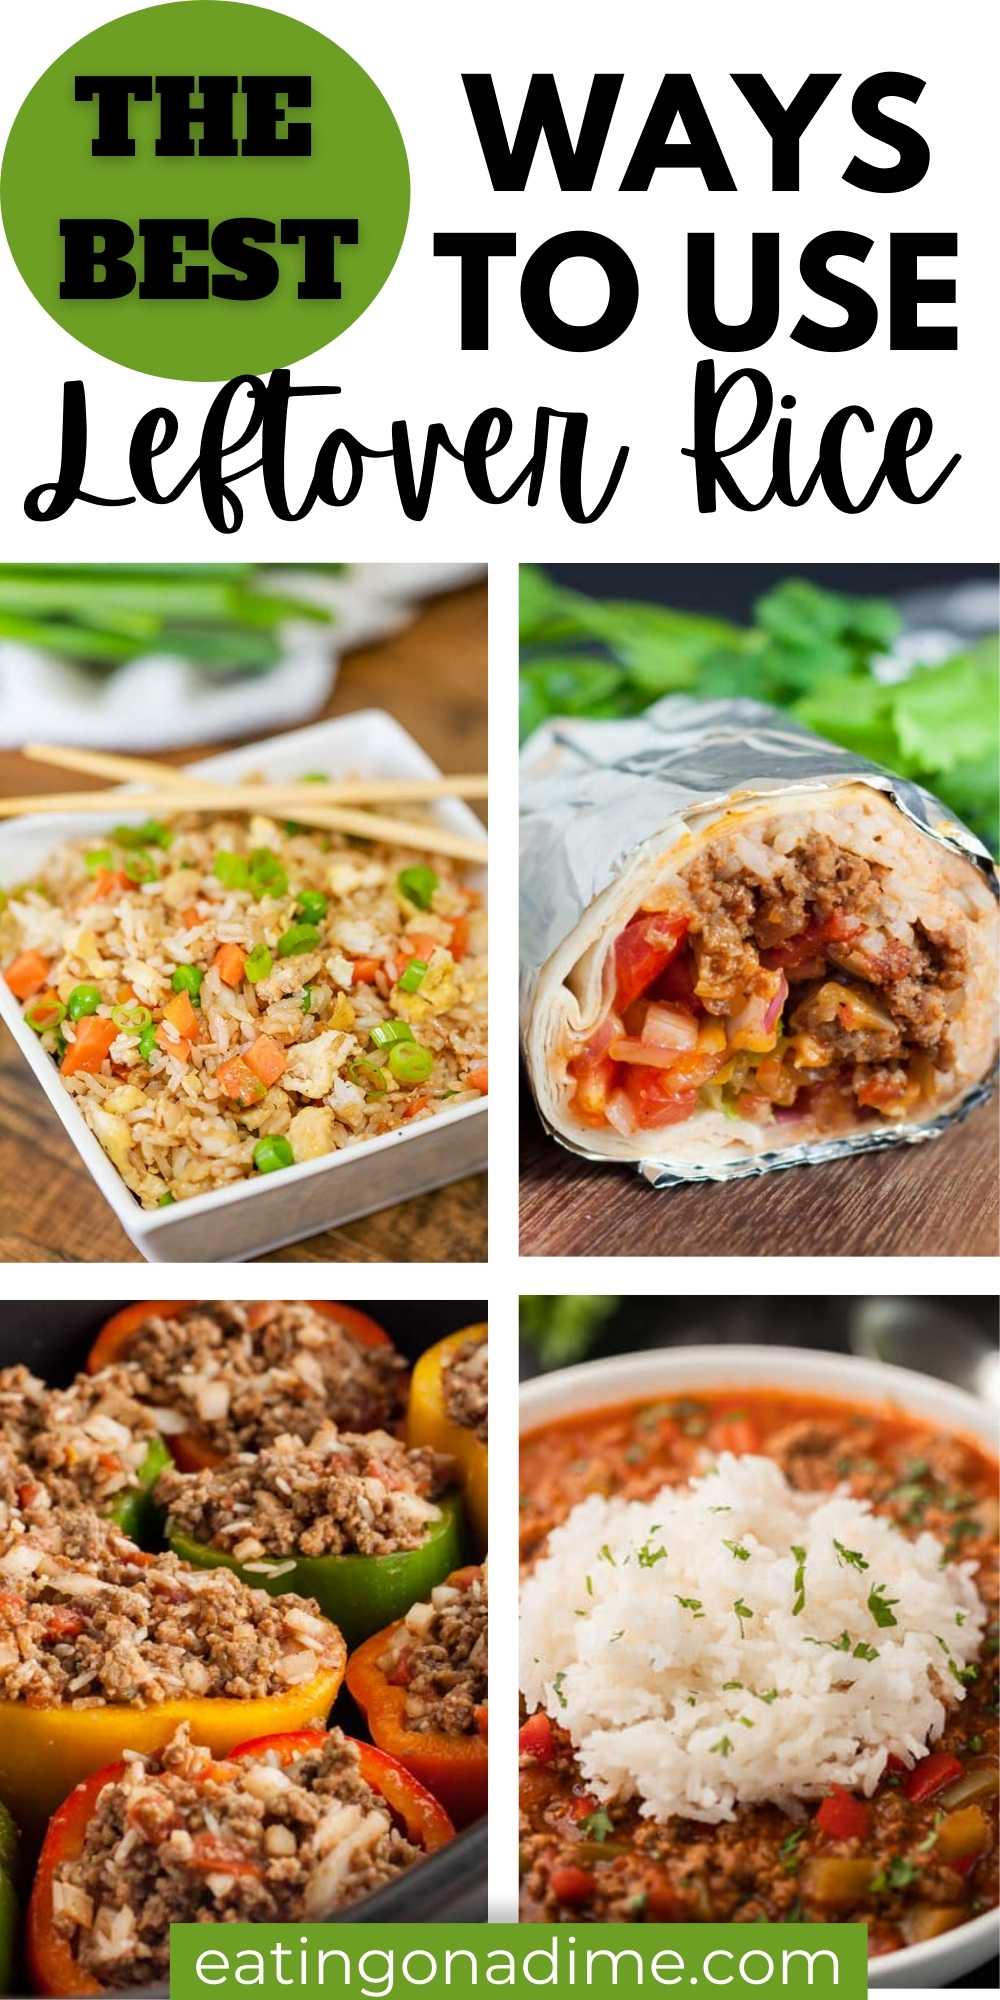 Check out our favorite ways to use leftover rice.  These are easy recipes that you can use leftover rice in.  You are going to love them.  Don’t waste leftover rice any more! #eatingonadime #leftoverrice #ricerecipes 
